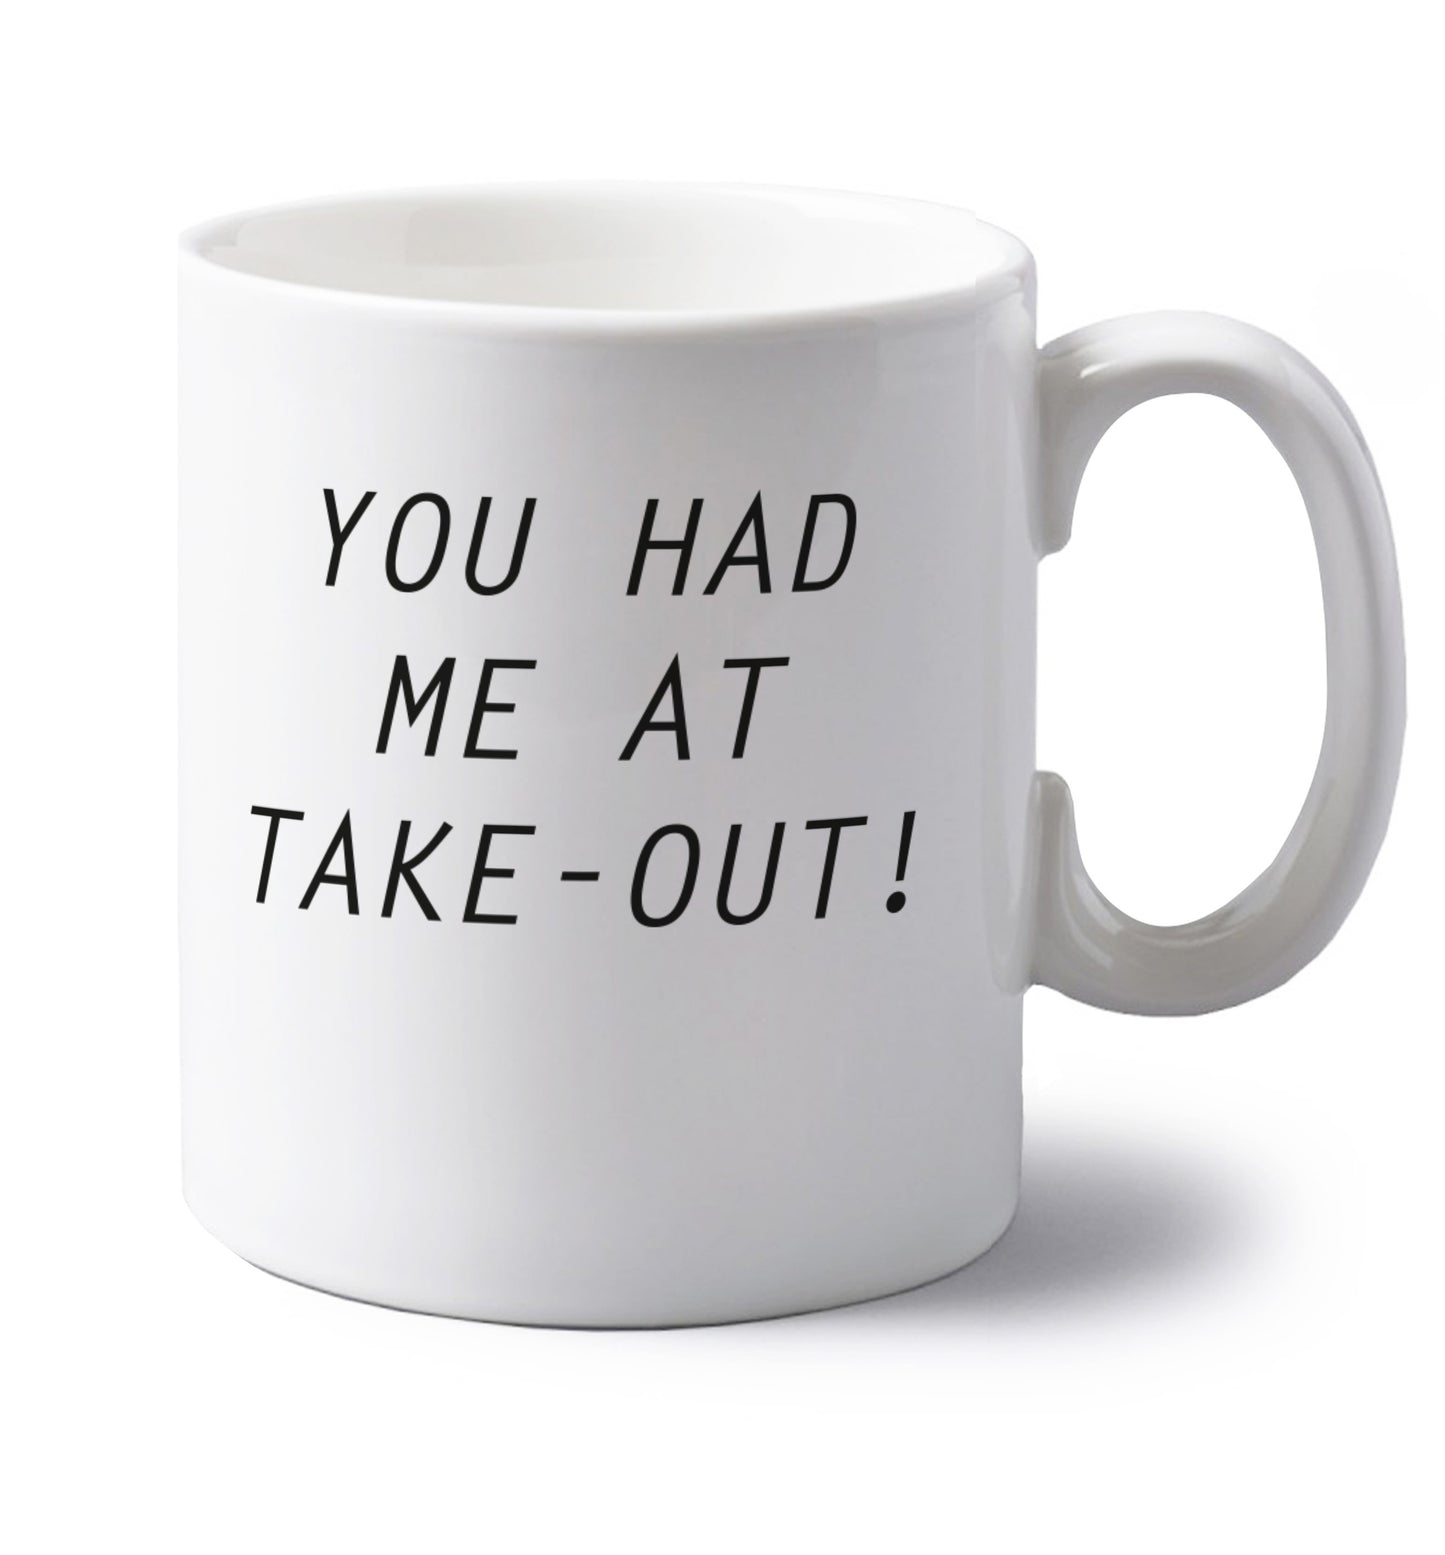 You had me at take-out left handed white ceramic mug 